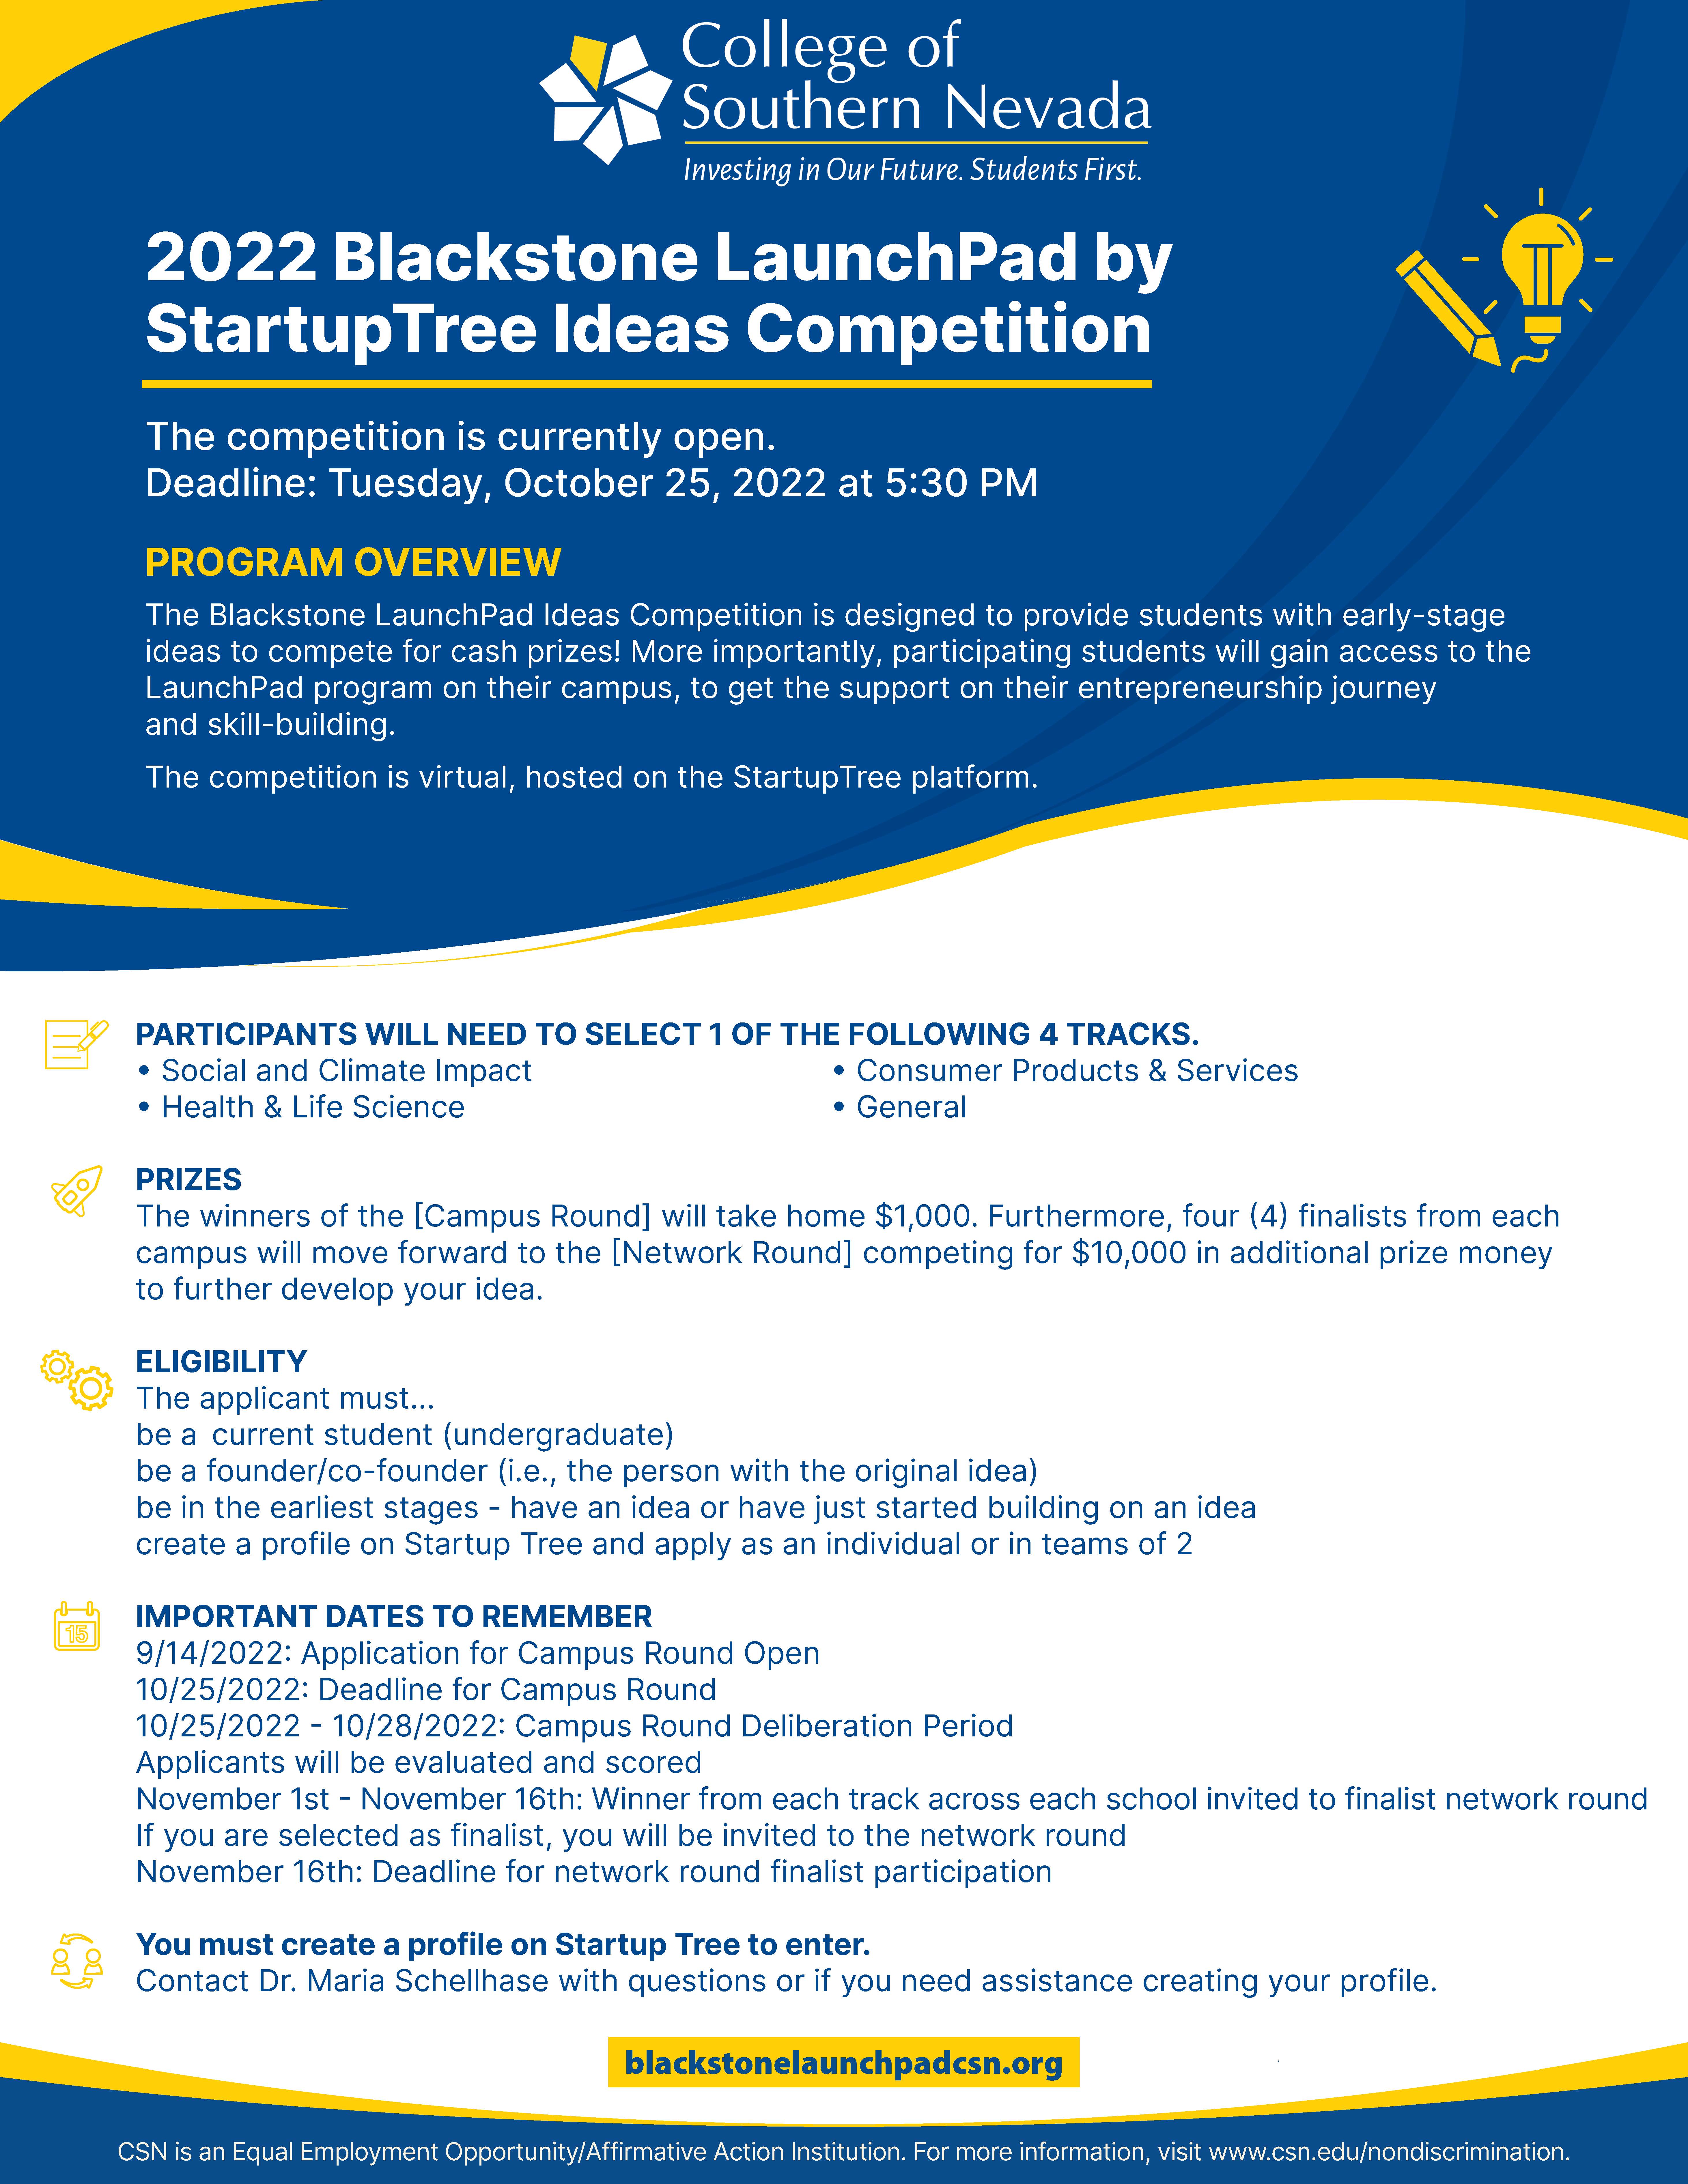 2022 Blackstone LaunchPad by StartupTree Ideas Competition